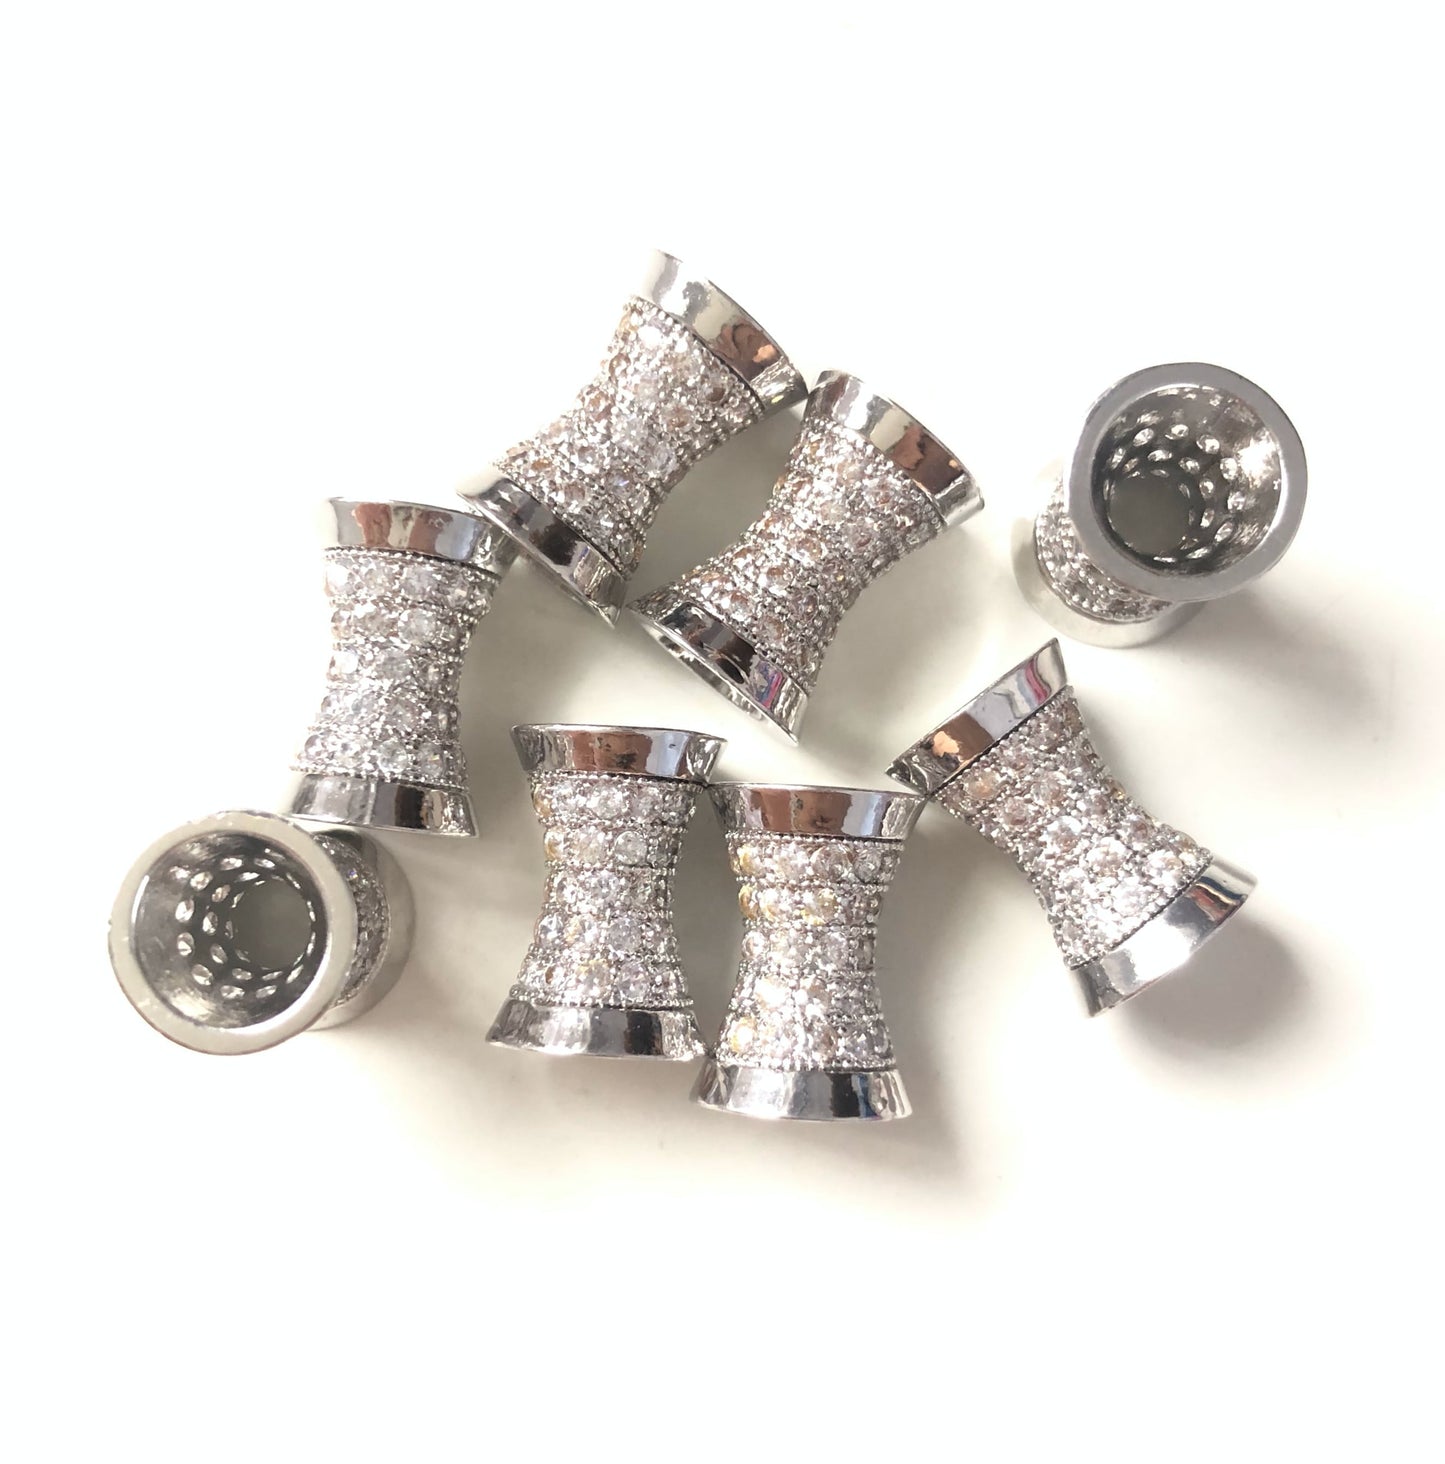 20pcs/lot 13.8*9.7mm CZ Paved Hourglass Spacers Silver CZ Paved Spacers Hourglass Beads Charms Beads Beyond